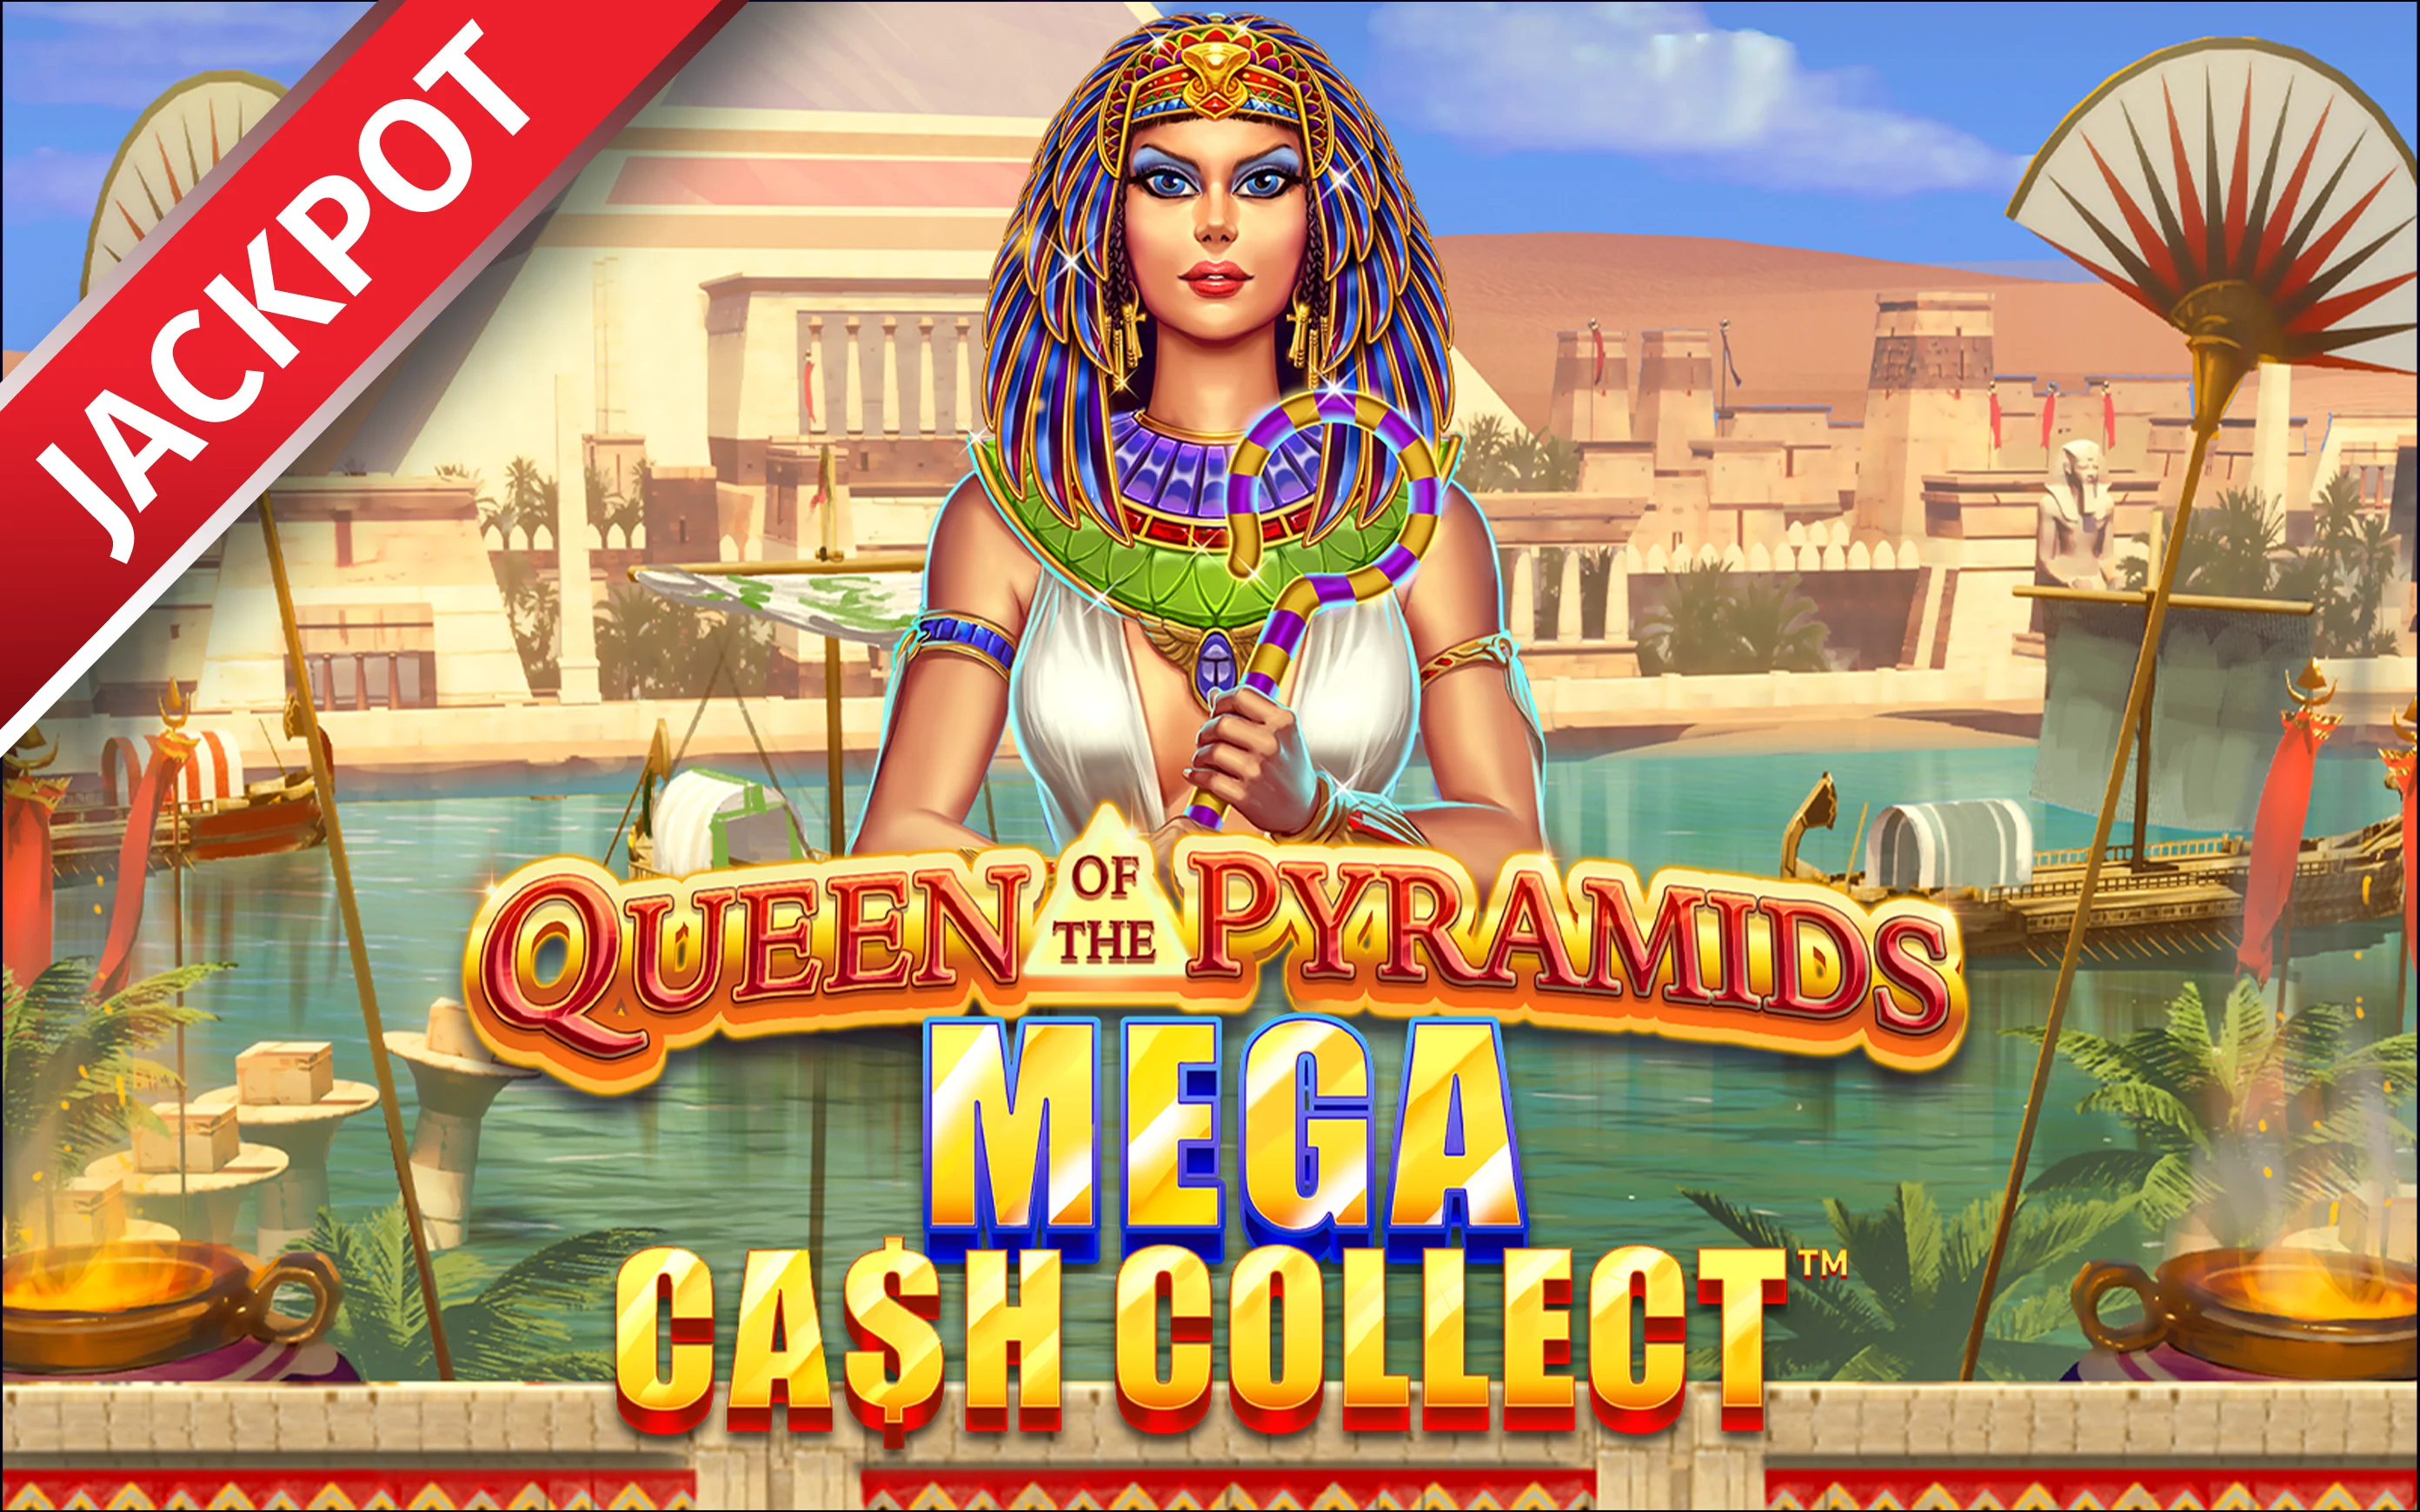 Play Queen of the Pyramids: Mega Cash Collect™ on Starcasino.be online casino